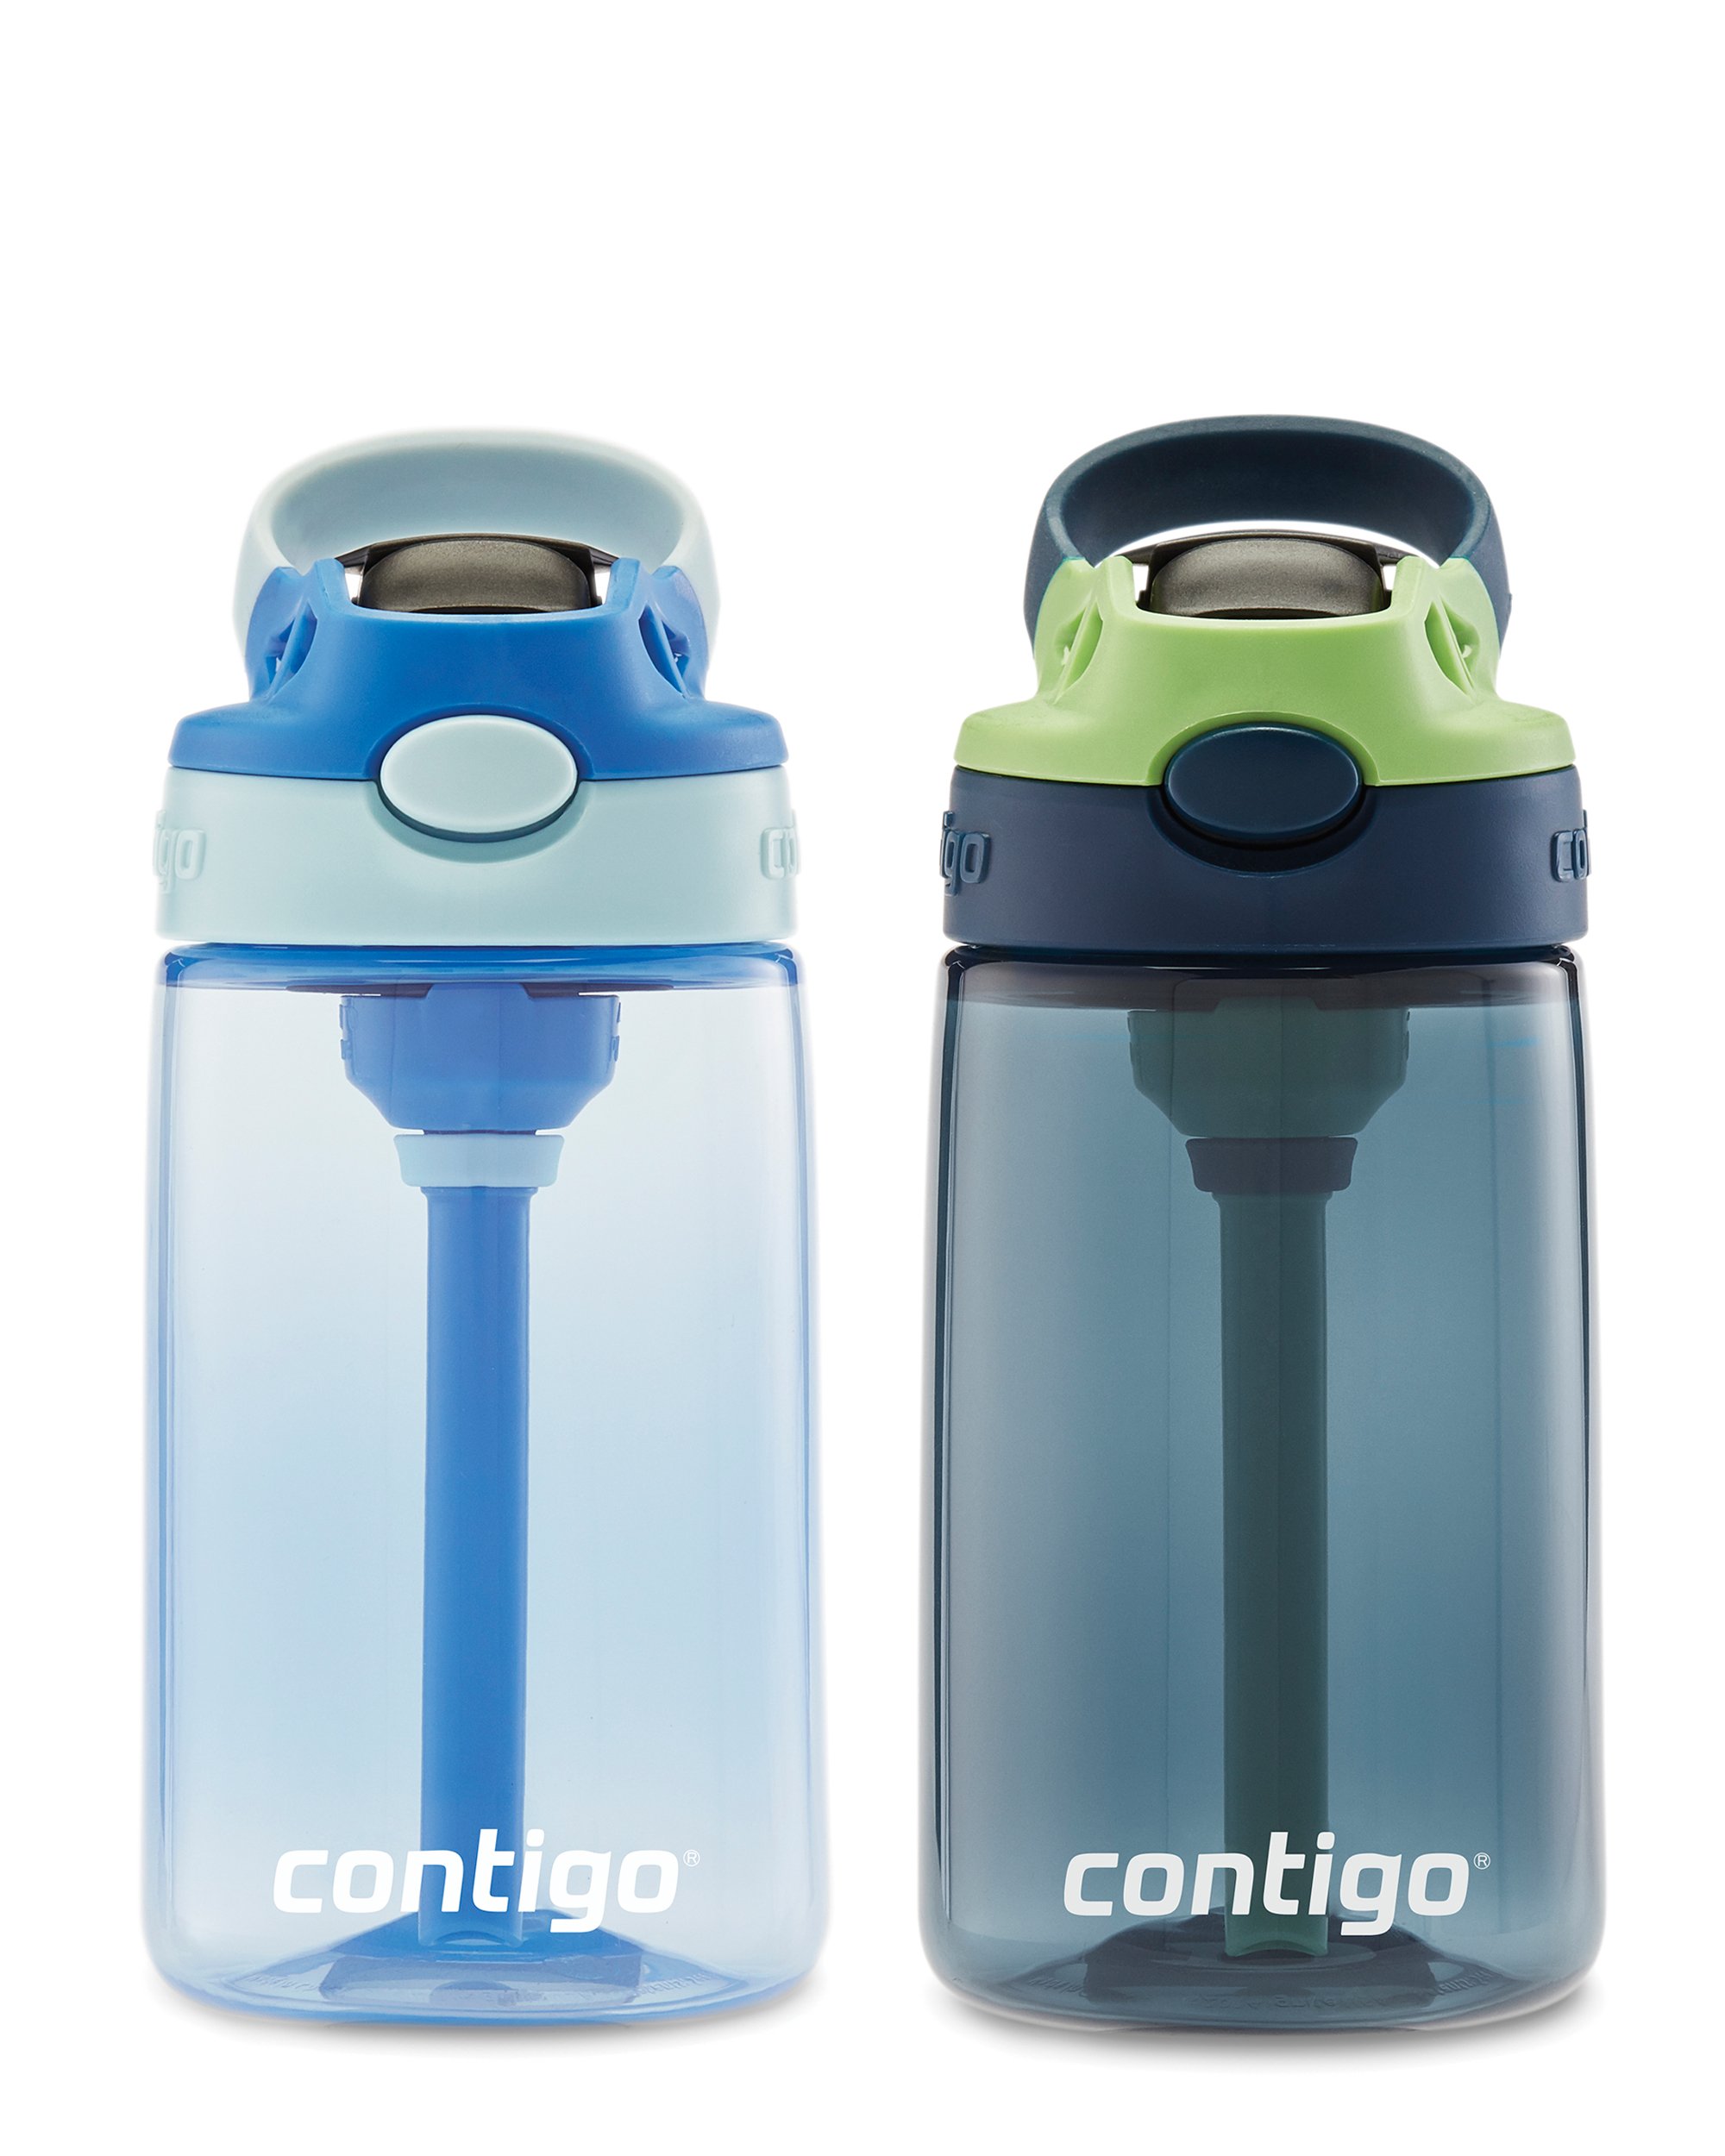 https://s7d9.scene7.com/is/image/NewellRubbermaid/Contigo2Pack_Kids%20Cleanable%2014oz%20blue%20and%20green%20apple